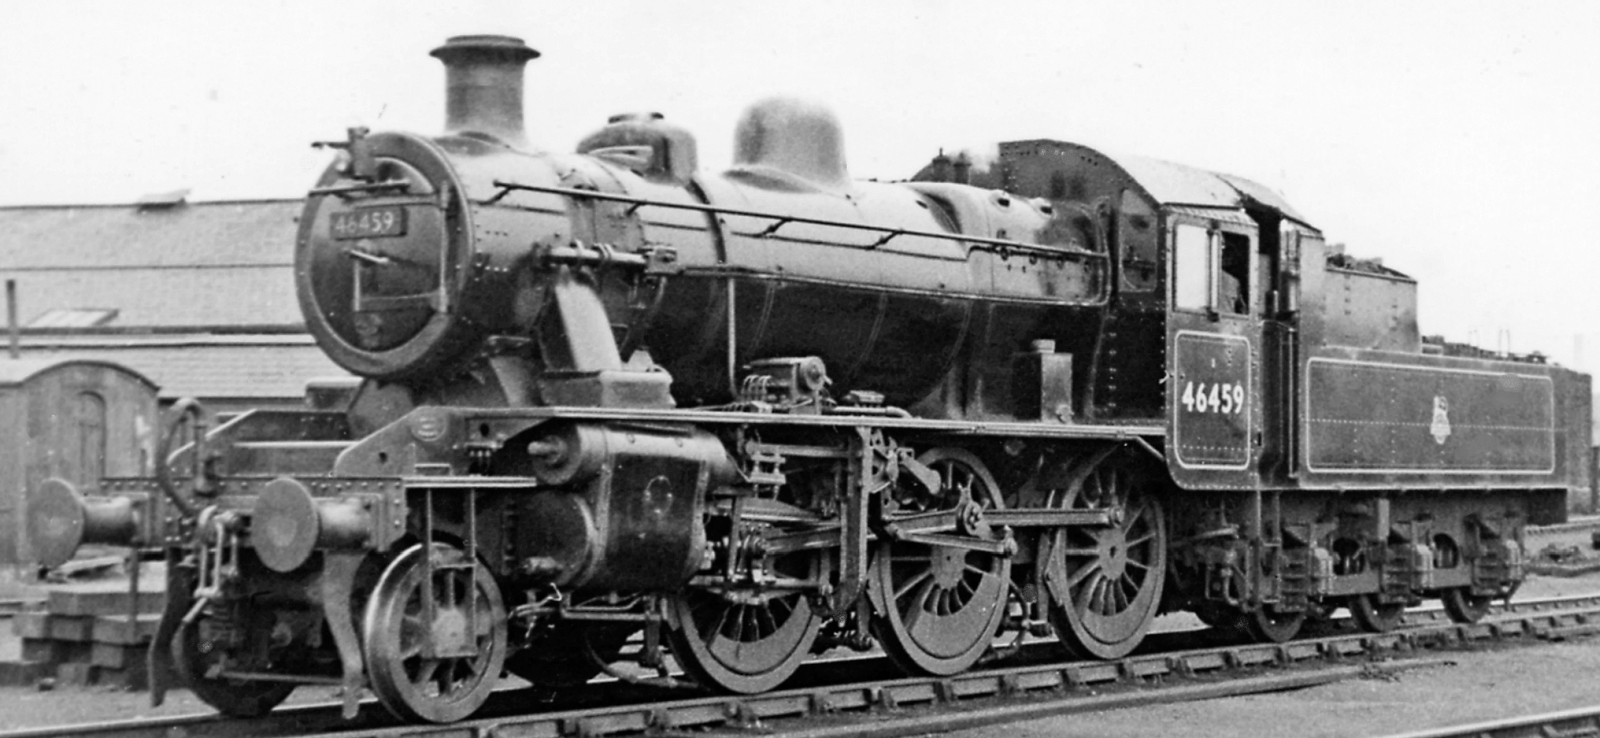 46459 in 1951 at Workington Depot